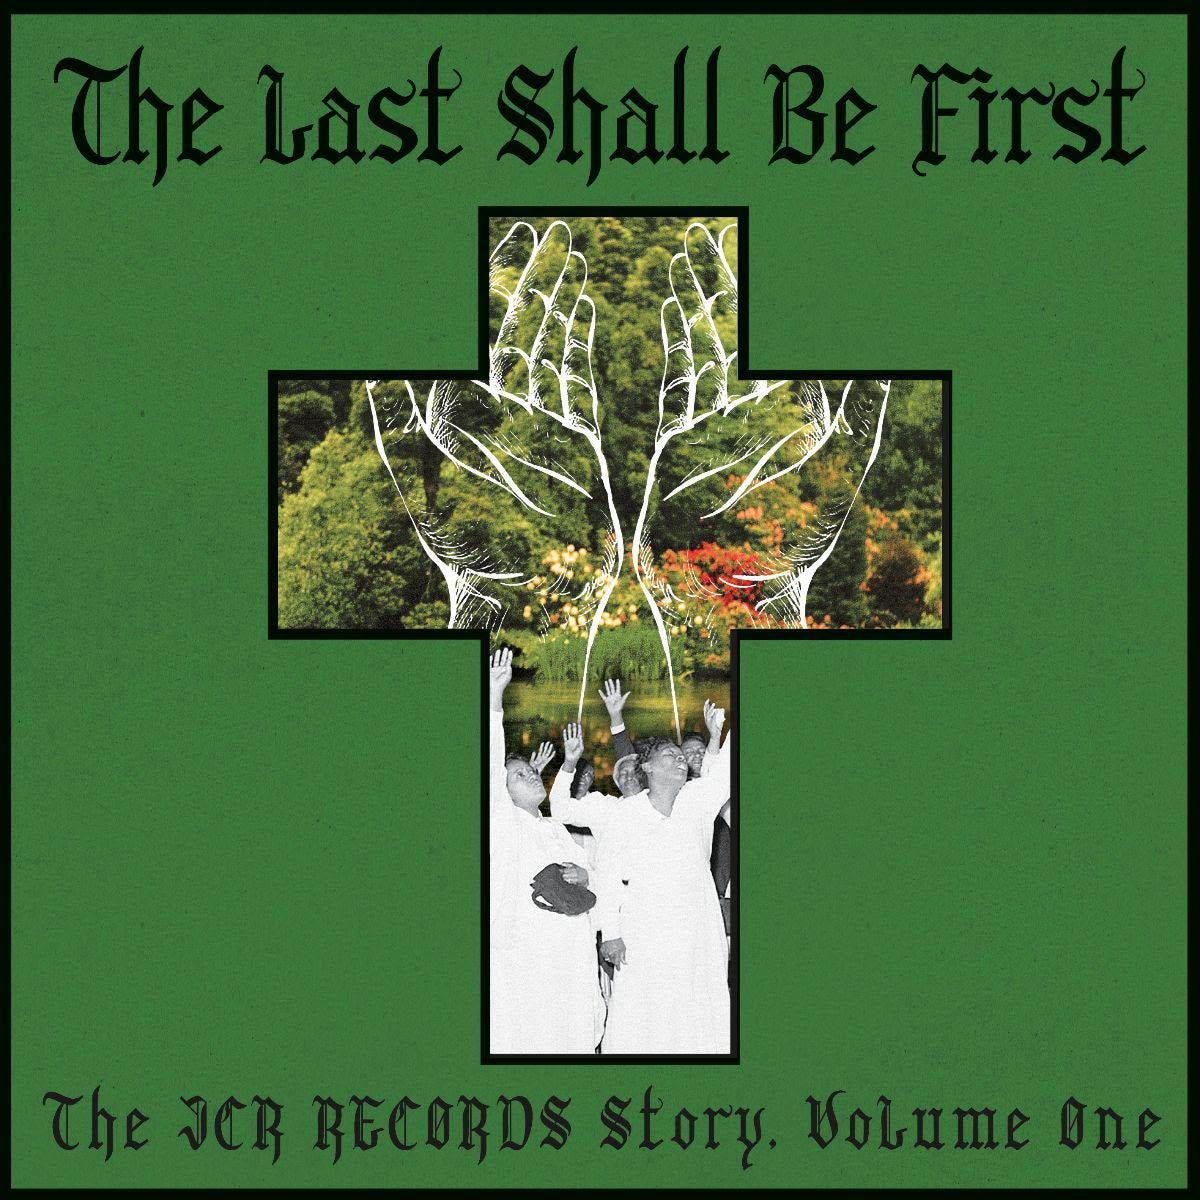 V/A - THE LAST SHALL BE FIRST Vinyl LP